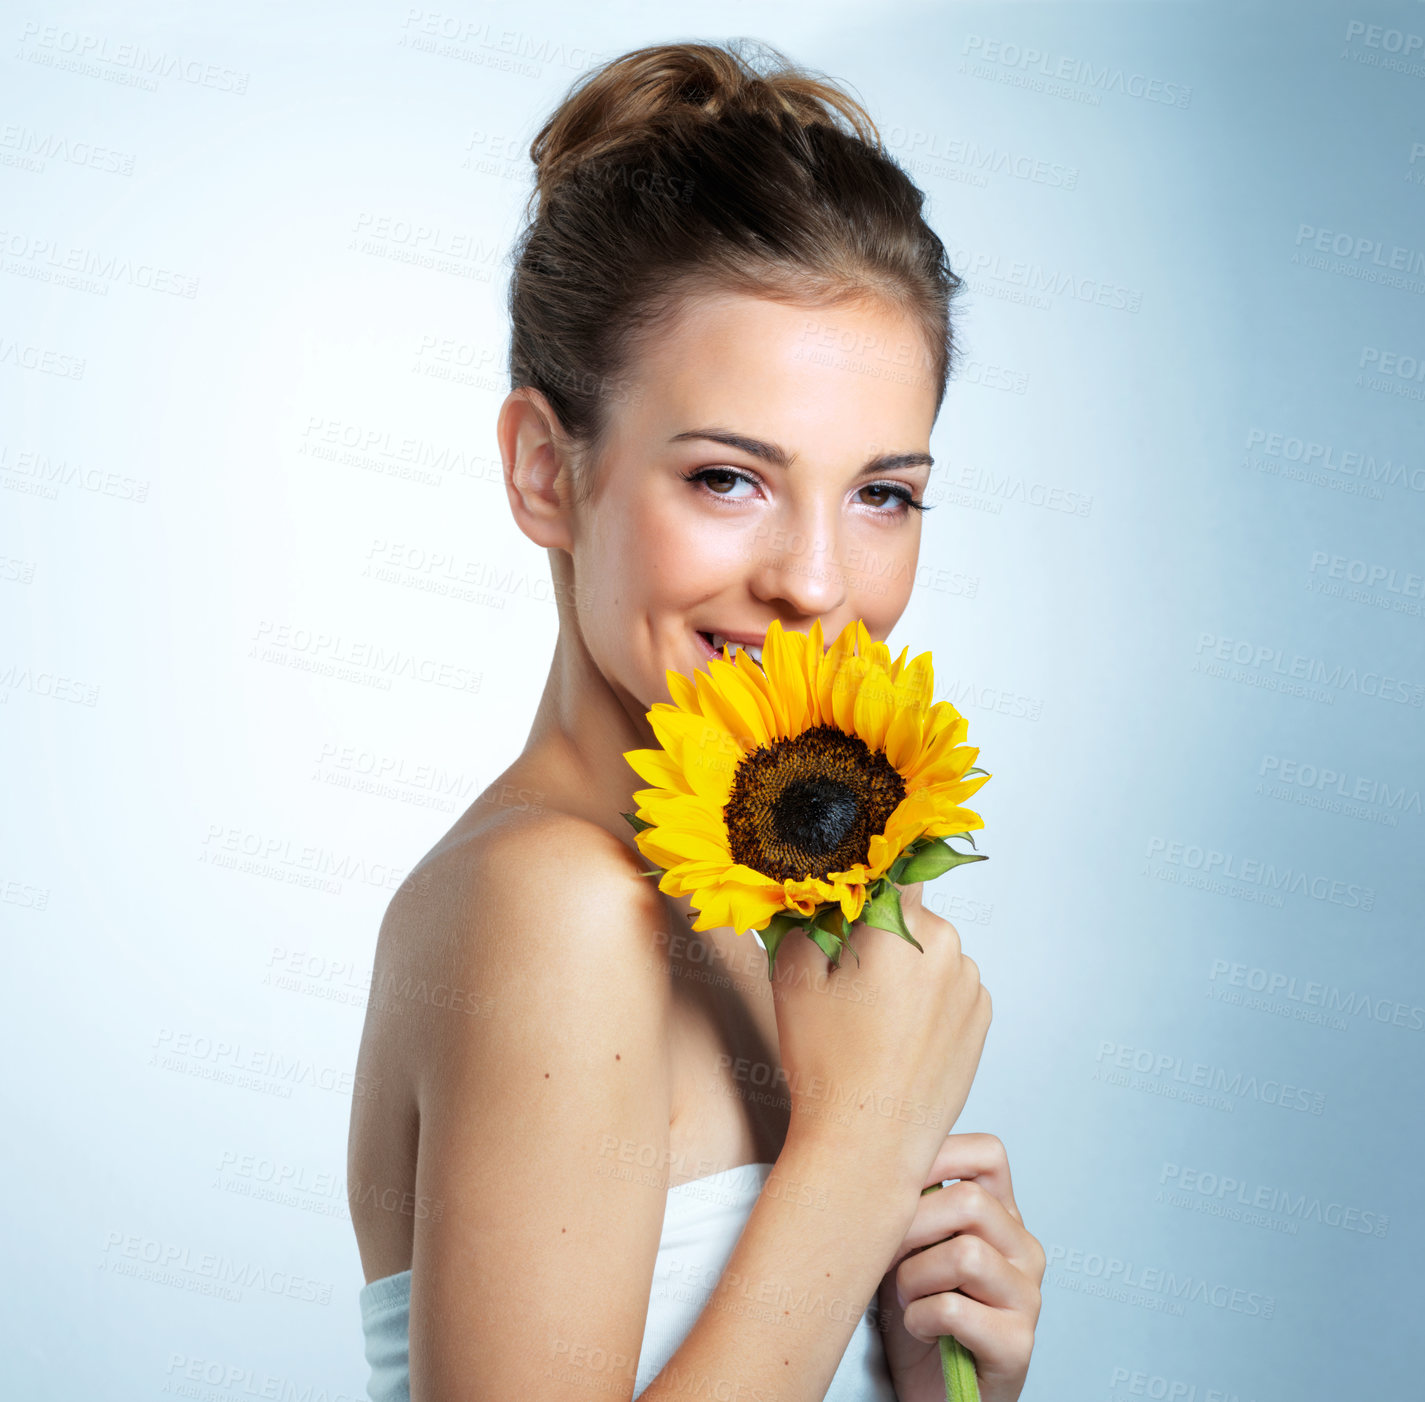 Buy stock photo Studio portrait of a beautiful young woman holding a sunflower